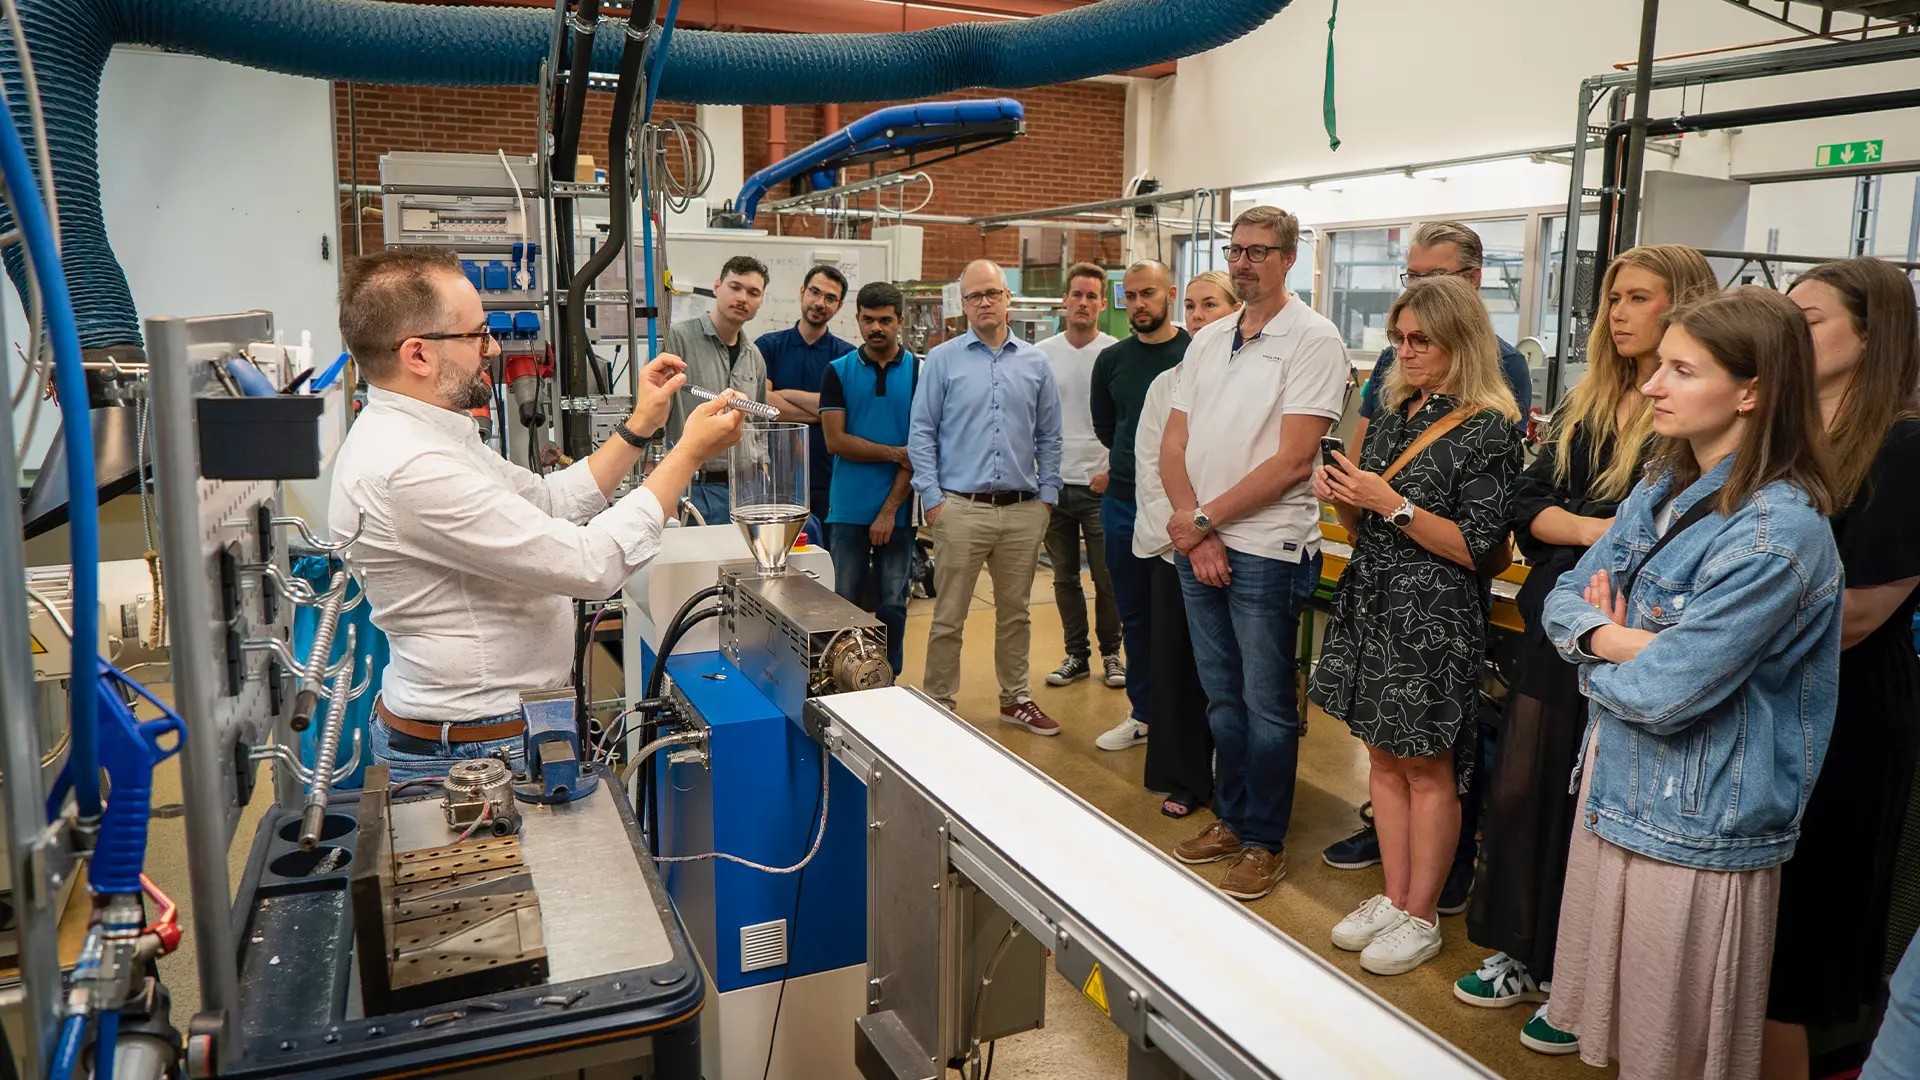 Professor Roland Kádár showing the new equipment to Wellspect employees.